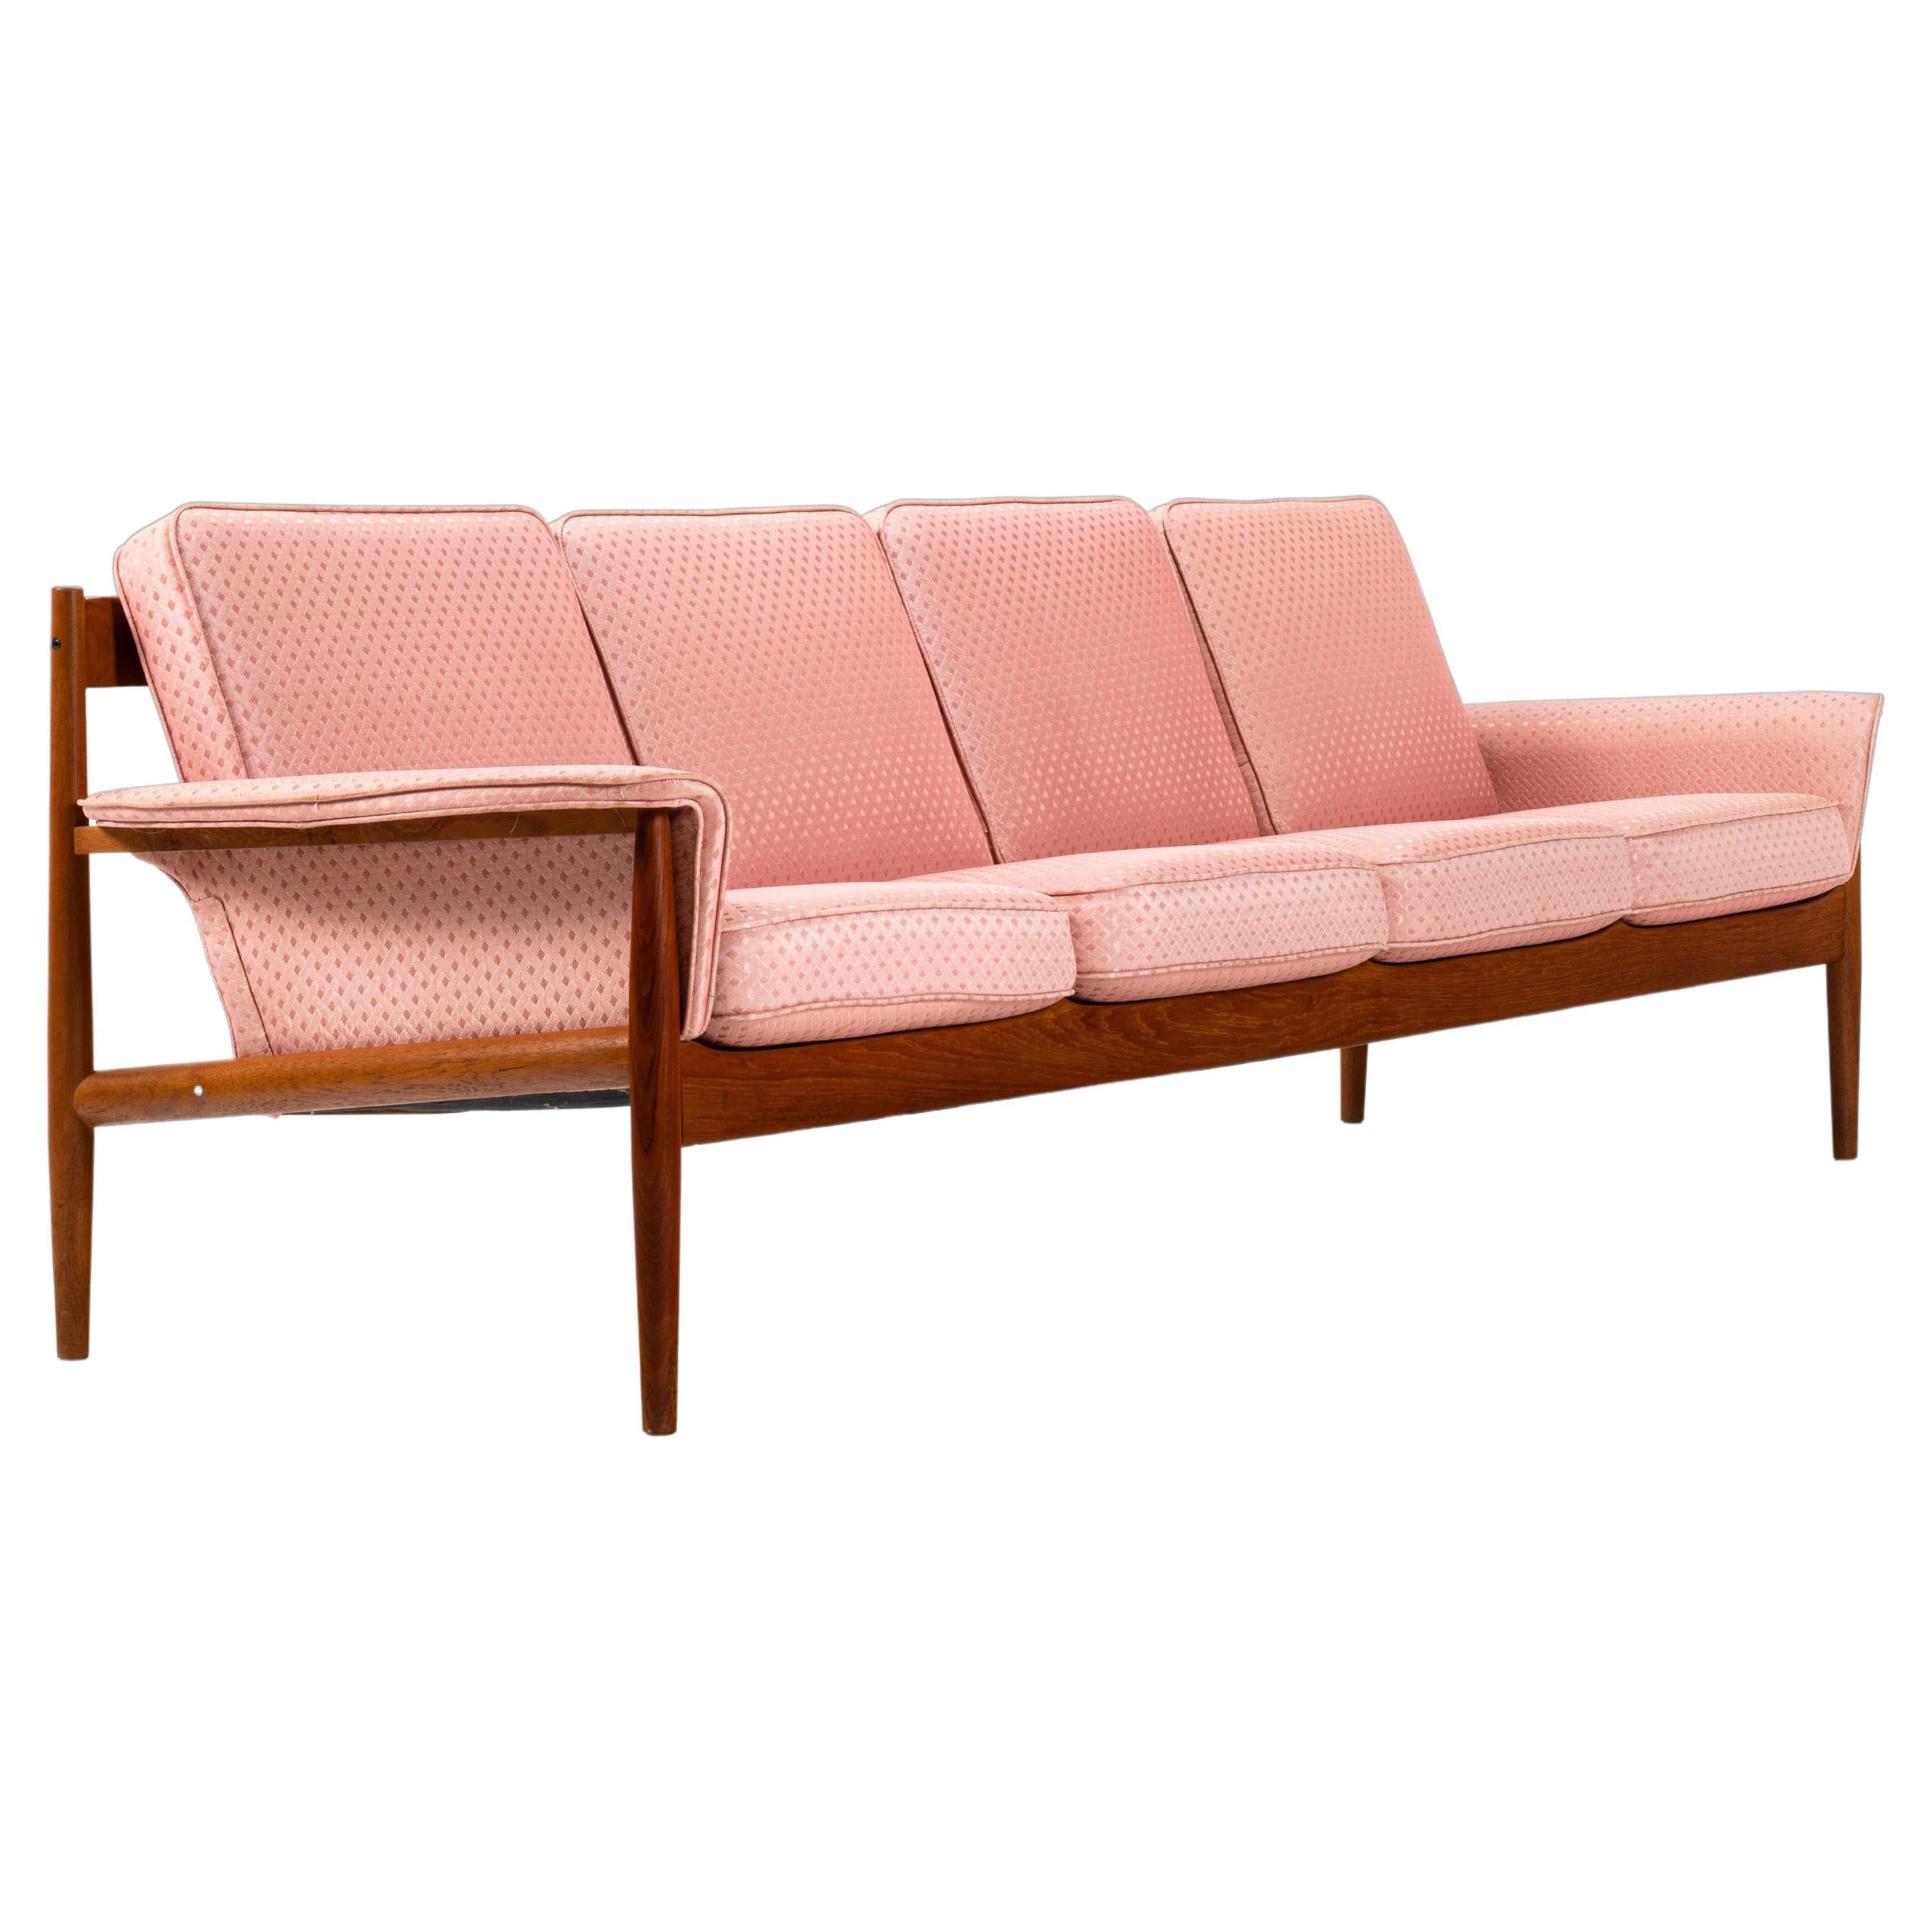 8 Ft. Long Four Seat Sofa by Grete Jalk for France and Sons in Teak, c. 1960s